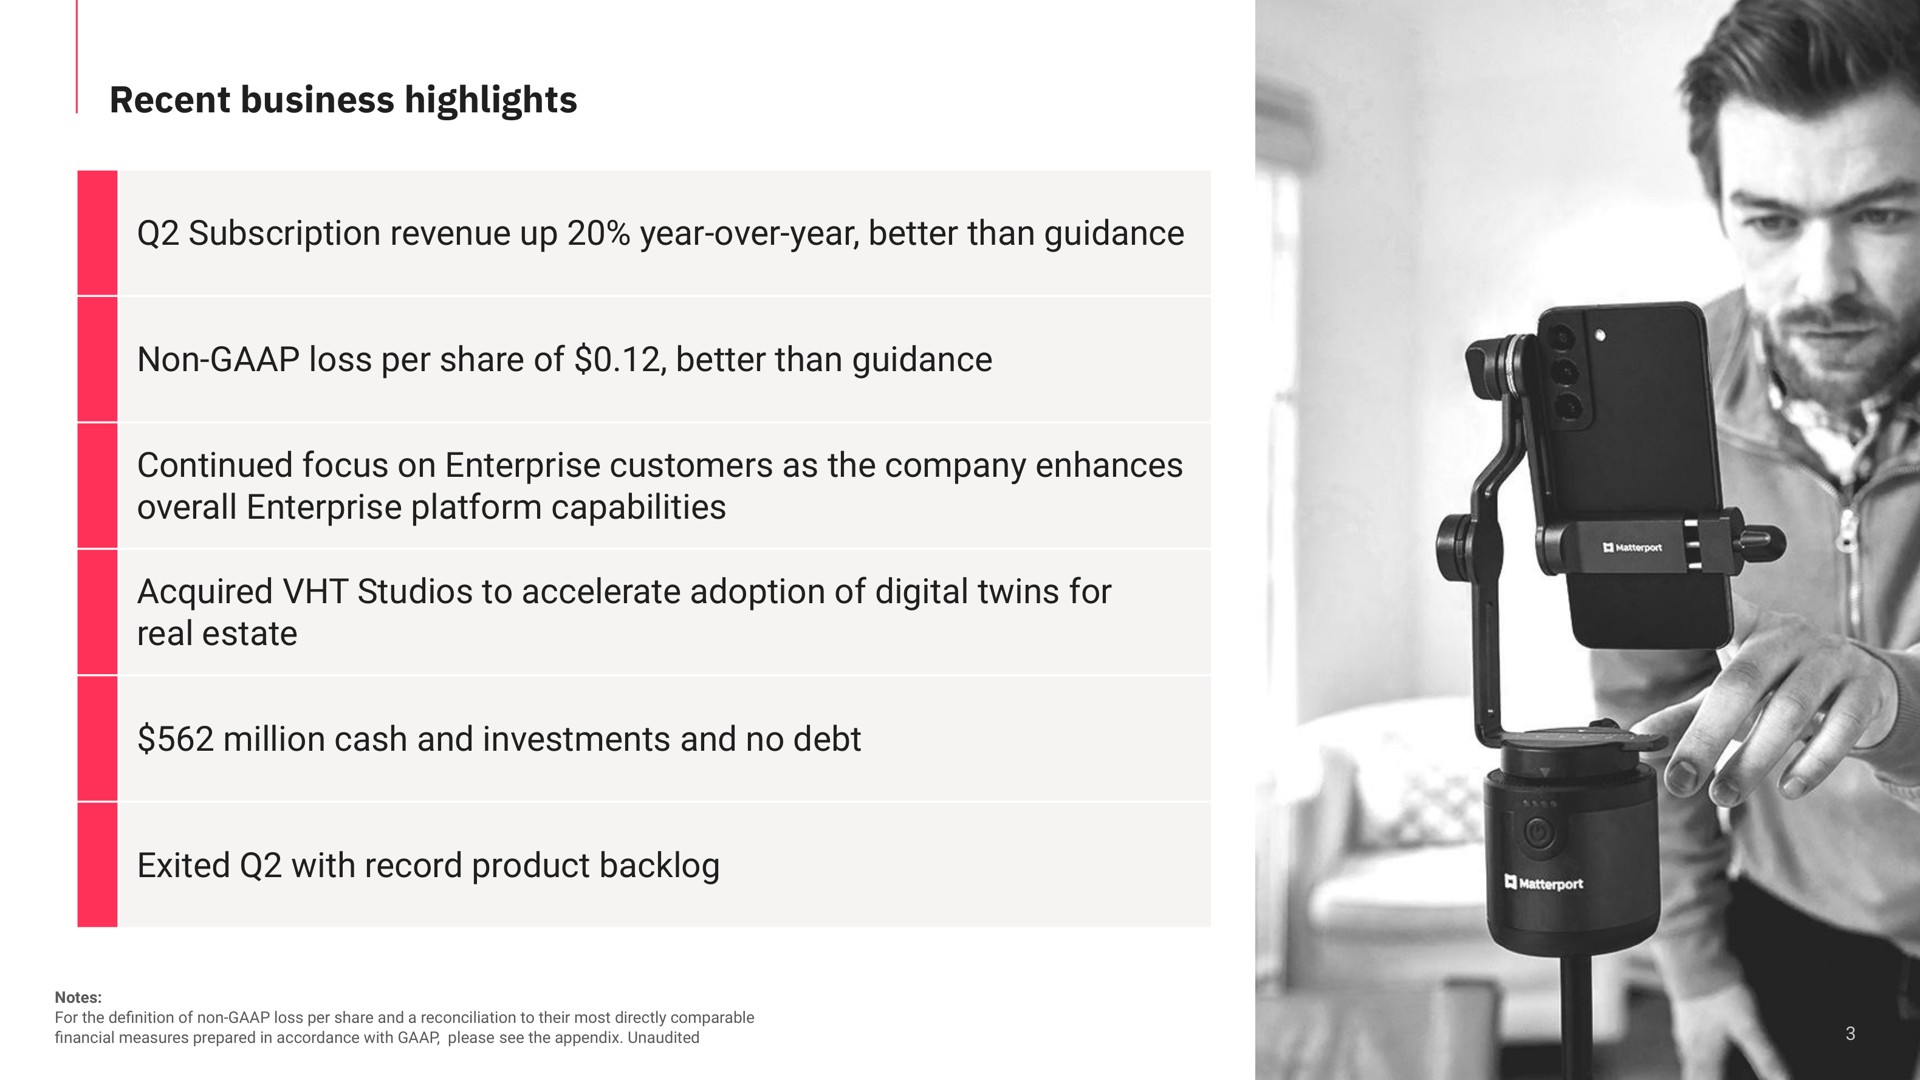 recent business highlights subscription revenue up year over year better than guidance non loss per share of better than guidance continued focus on enterprise customers as the company enhances overall enterprise platform capabilities acquired studios to accelerate adoption of digital twins for real estate million cash and investments and no debt exited with record product backlog | Matterport